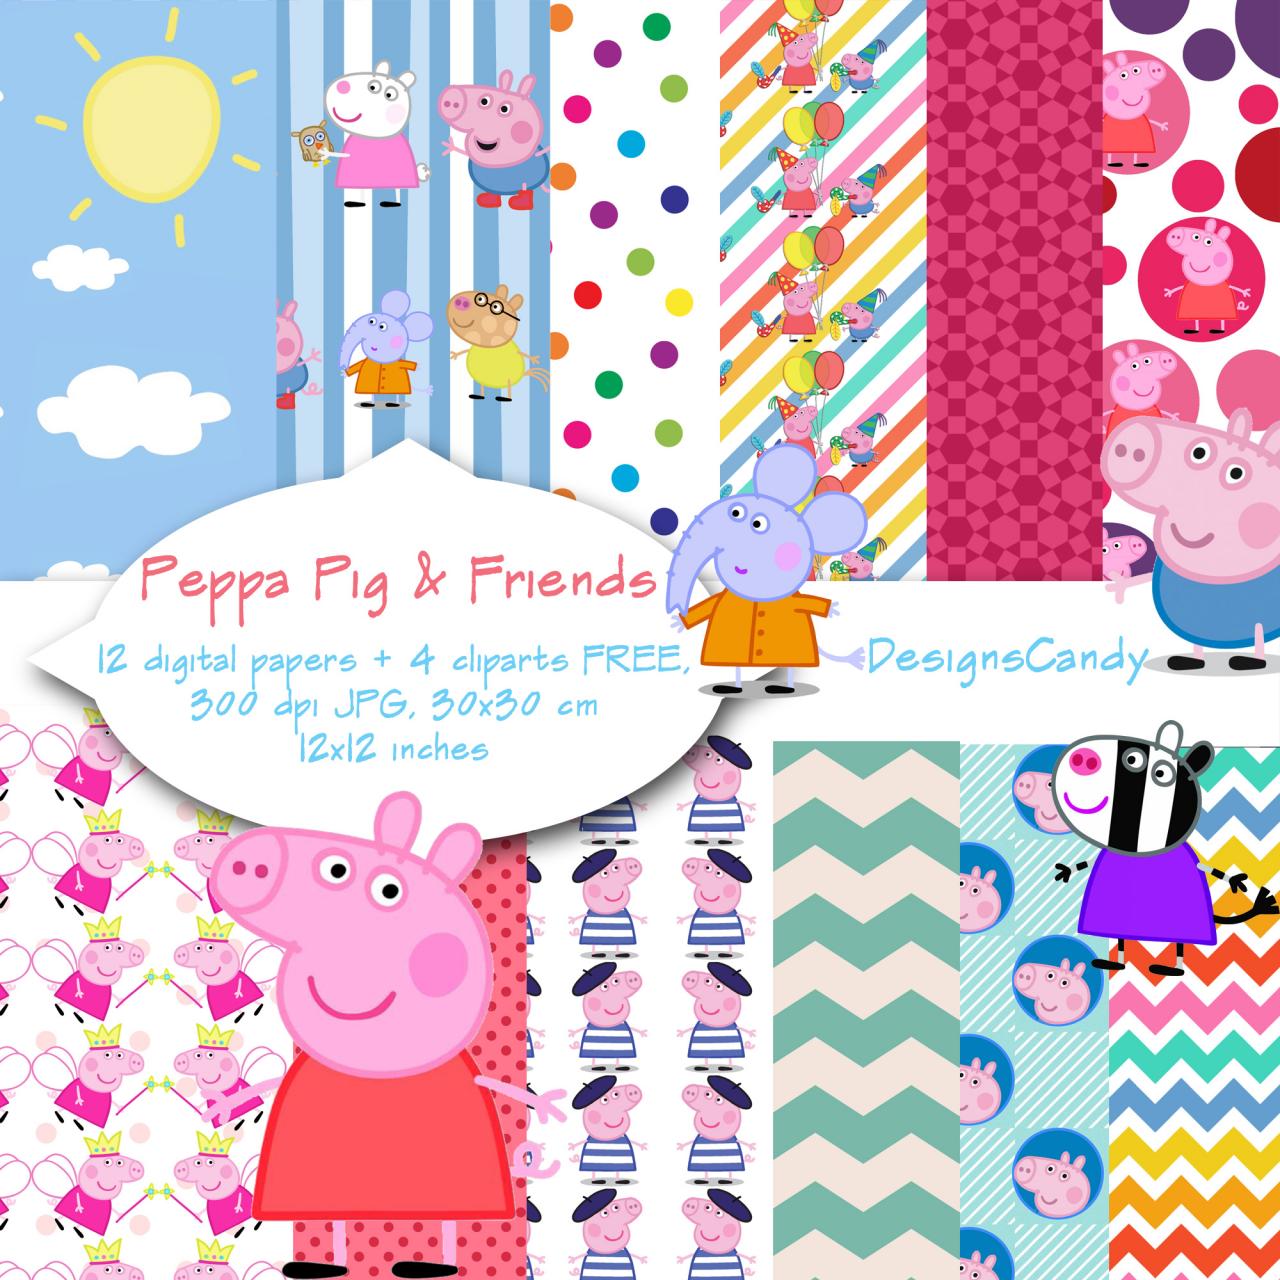 Peppa Pig Inspired Digital Paper,peppa Pig Clipart, Scrapbook, Background, Digital Paper, Birthday Party Theme, Invitations. P&c Use